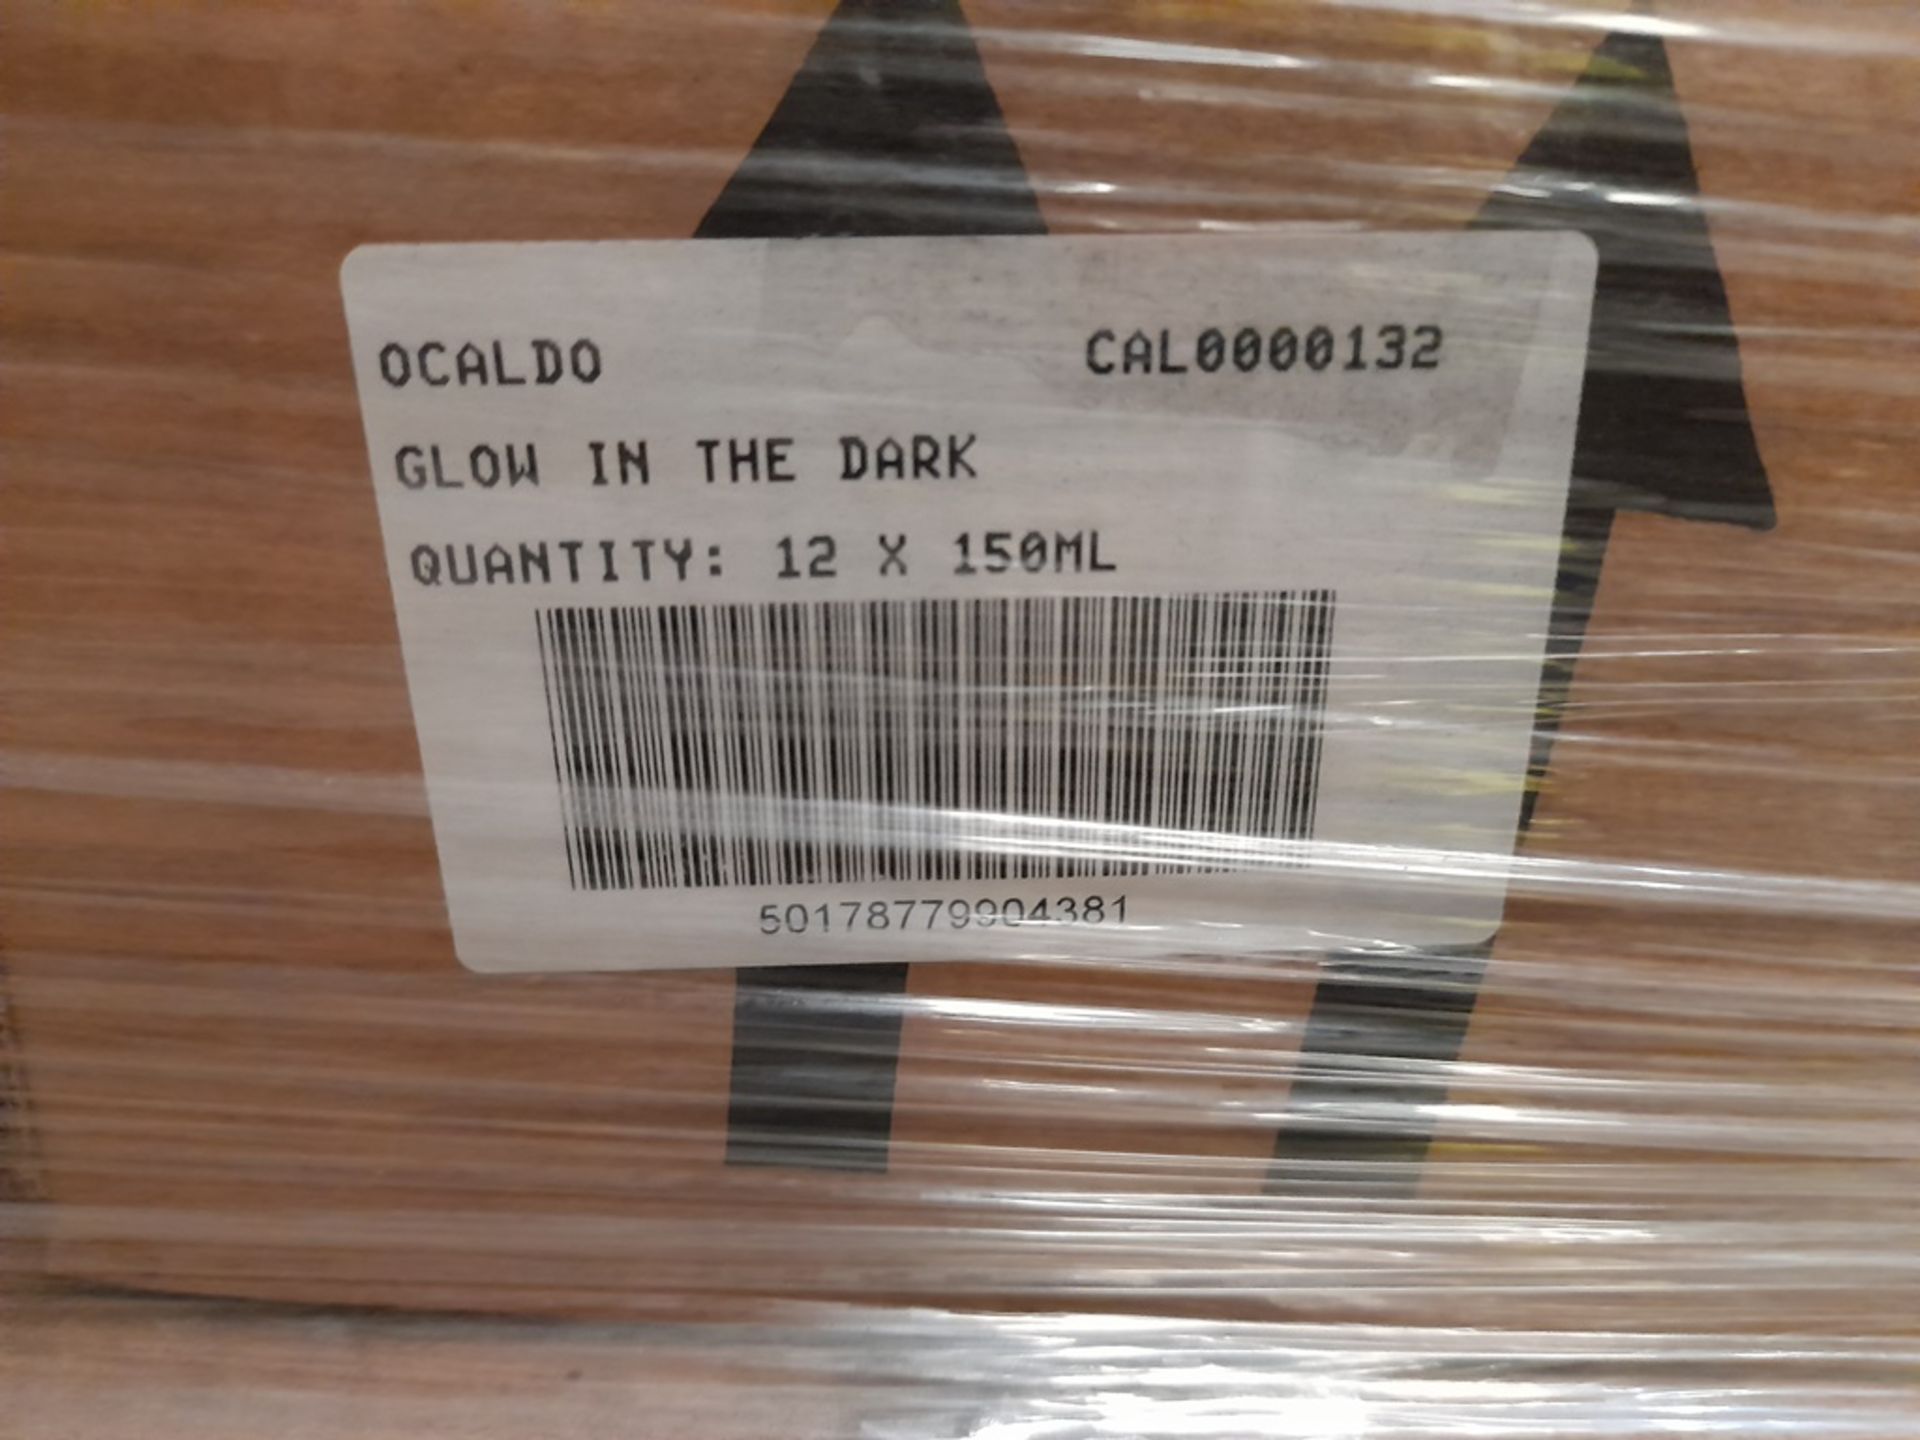 1 Pallet of Ocaldo mixed paint including glow in the dark paint, Ready Mix paint - bronze, lilac, - Image 2 of 7